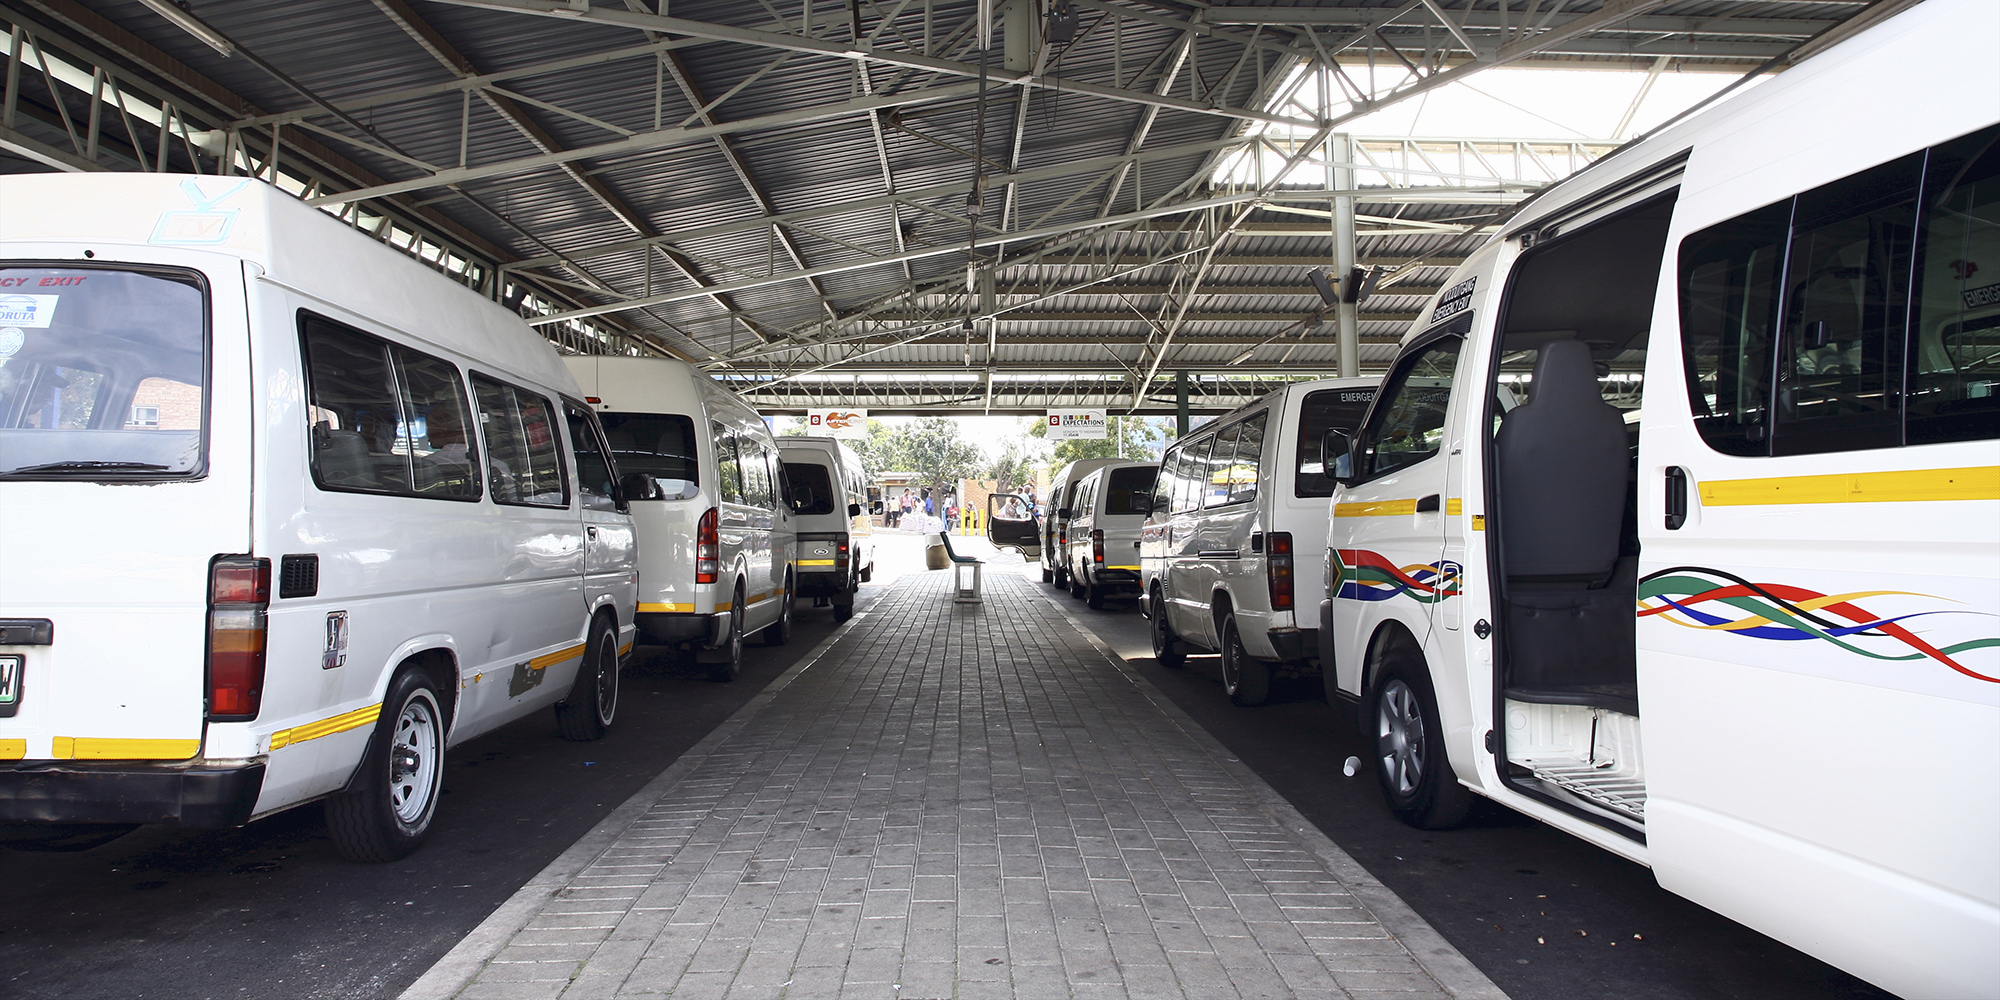 The Commission of Inquiry into Taxi Violence continues on 22 October